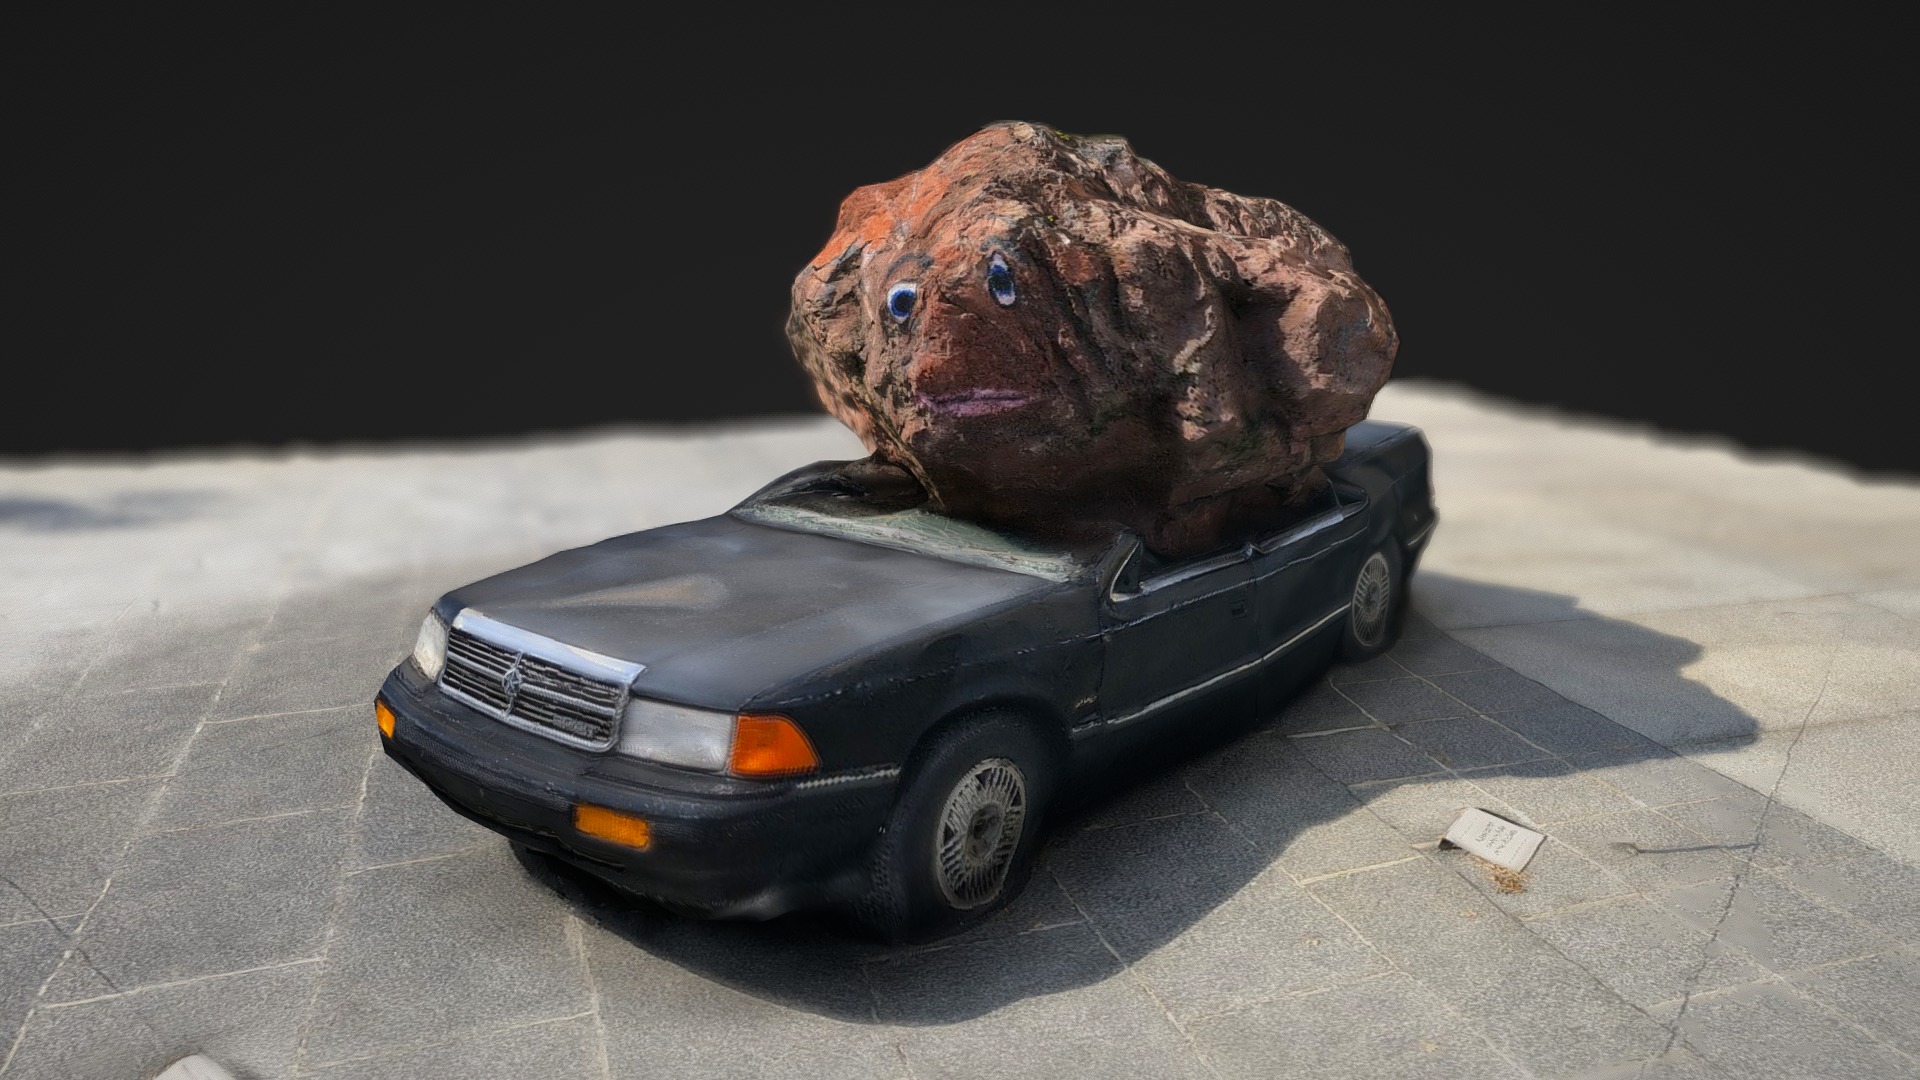 3D model Car Wreck with Volcanic Stone 3D Model - This is a 3D model of the Car Wreck with Volcanic Stone 3D Model. The 3D model is about a toy car with a rock on top of it.